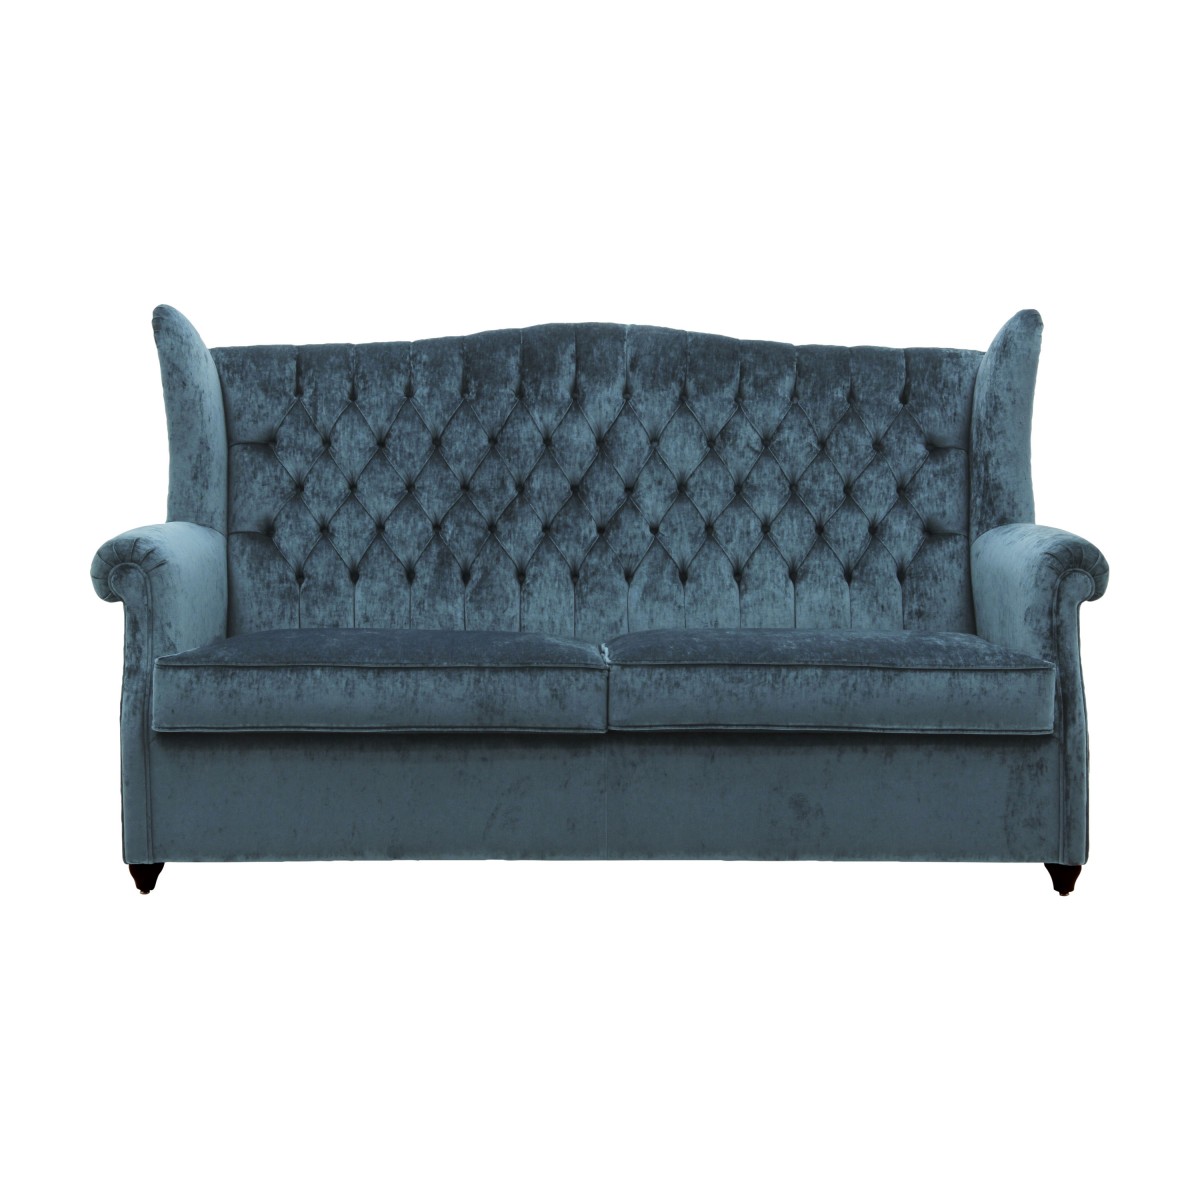 Italian sleeper couch, convertible sofa bed, blue sofa bed in classic style, with revolving bed mechanism 